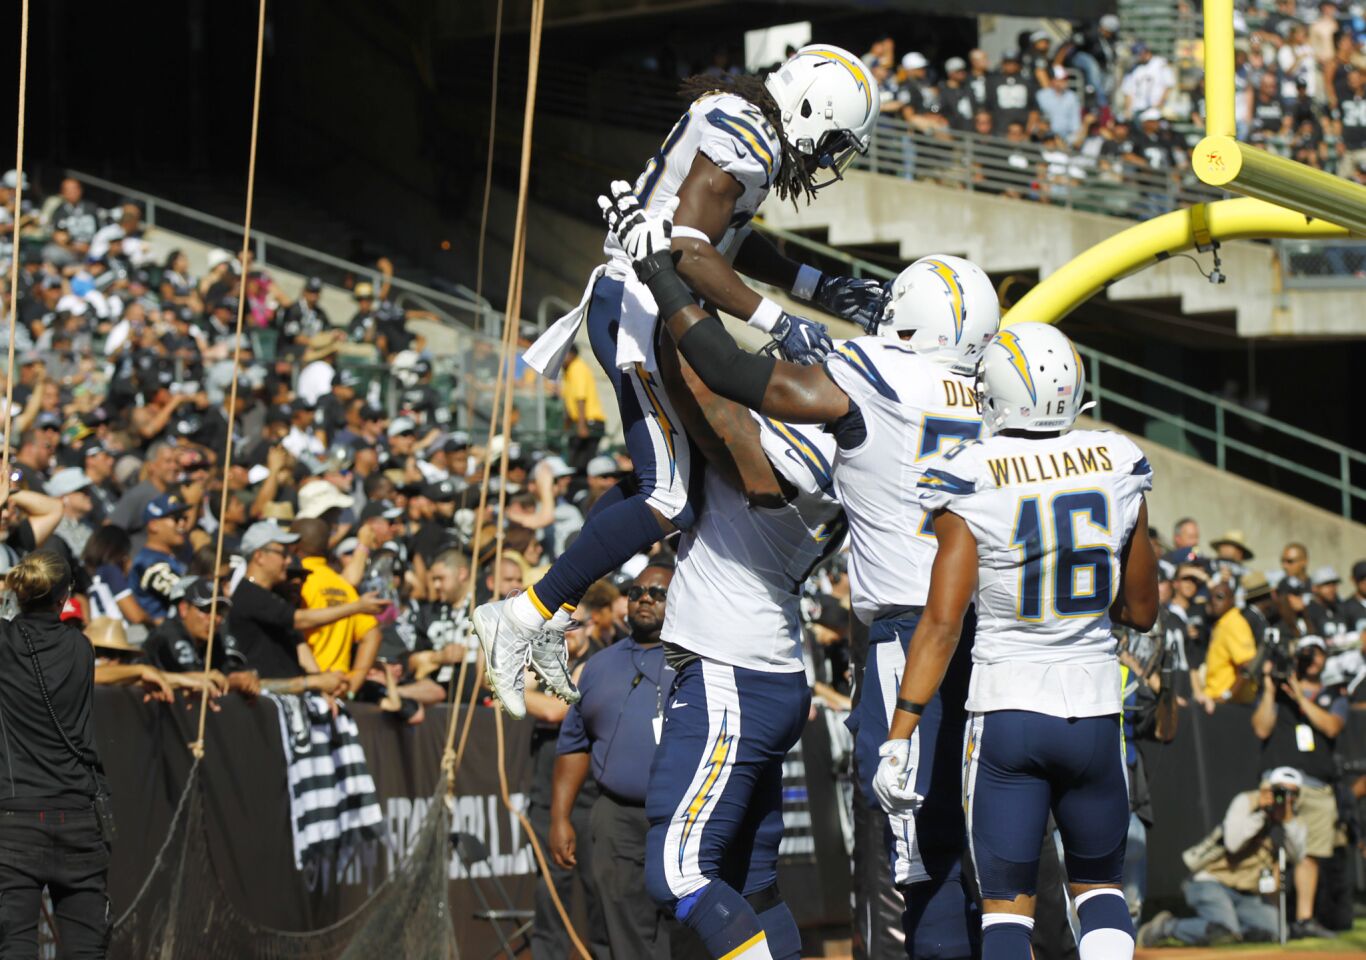 San Diego Chargers Melvin Gordon celebrates a touchdown against the Raiders in the 3rd quarter in Oakland on Oct. 9, 2016. (Photo by K.C. Alfred/The San Diego Union-Tribune)